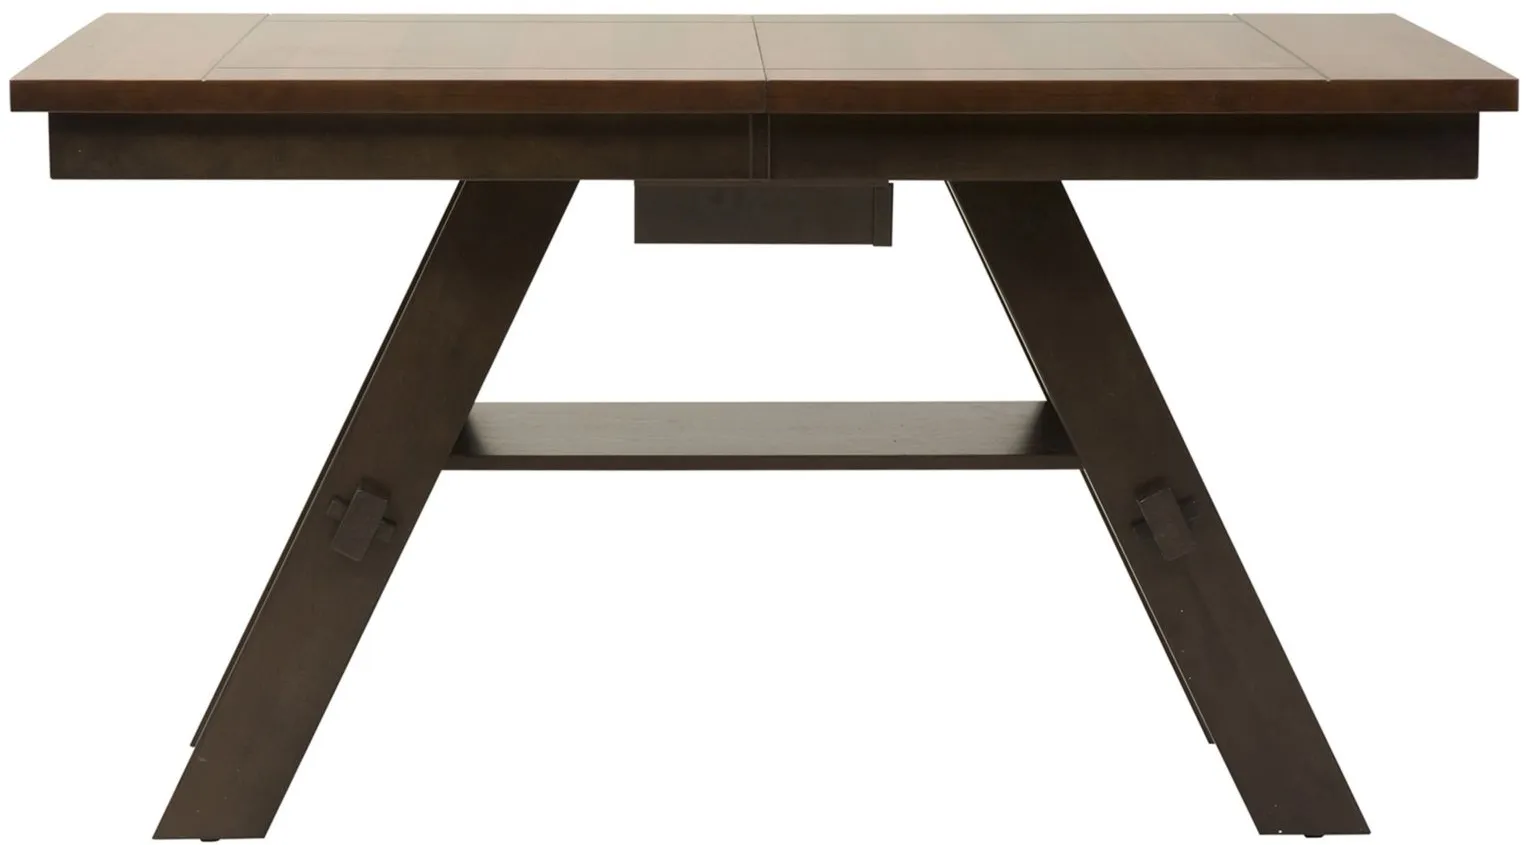 Timothy Counter-Height Dining Table w/ Leaf in Black by Liberty Furniture